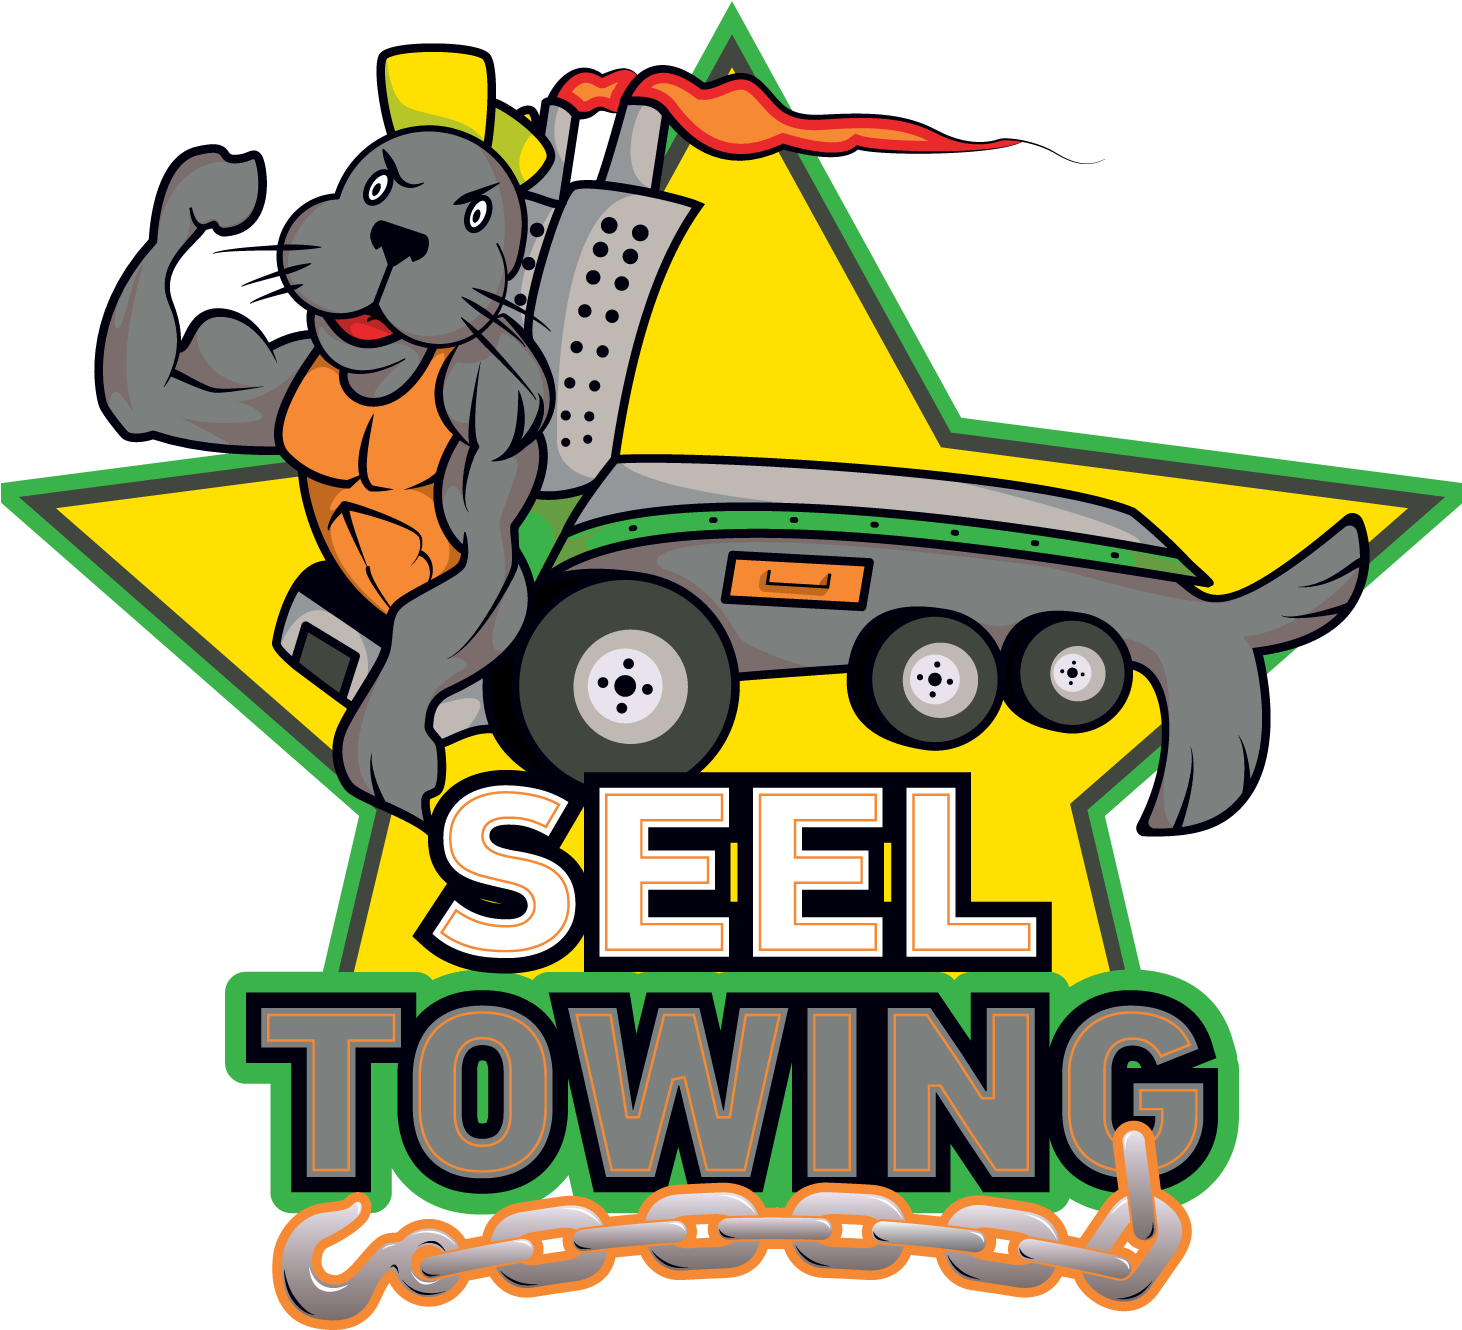 Seel Towing Calgary - Seel Towing And Recovery Services (1461x1461)